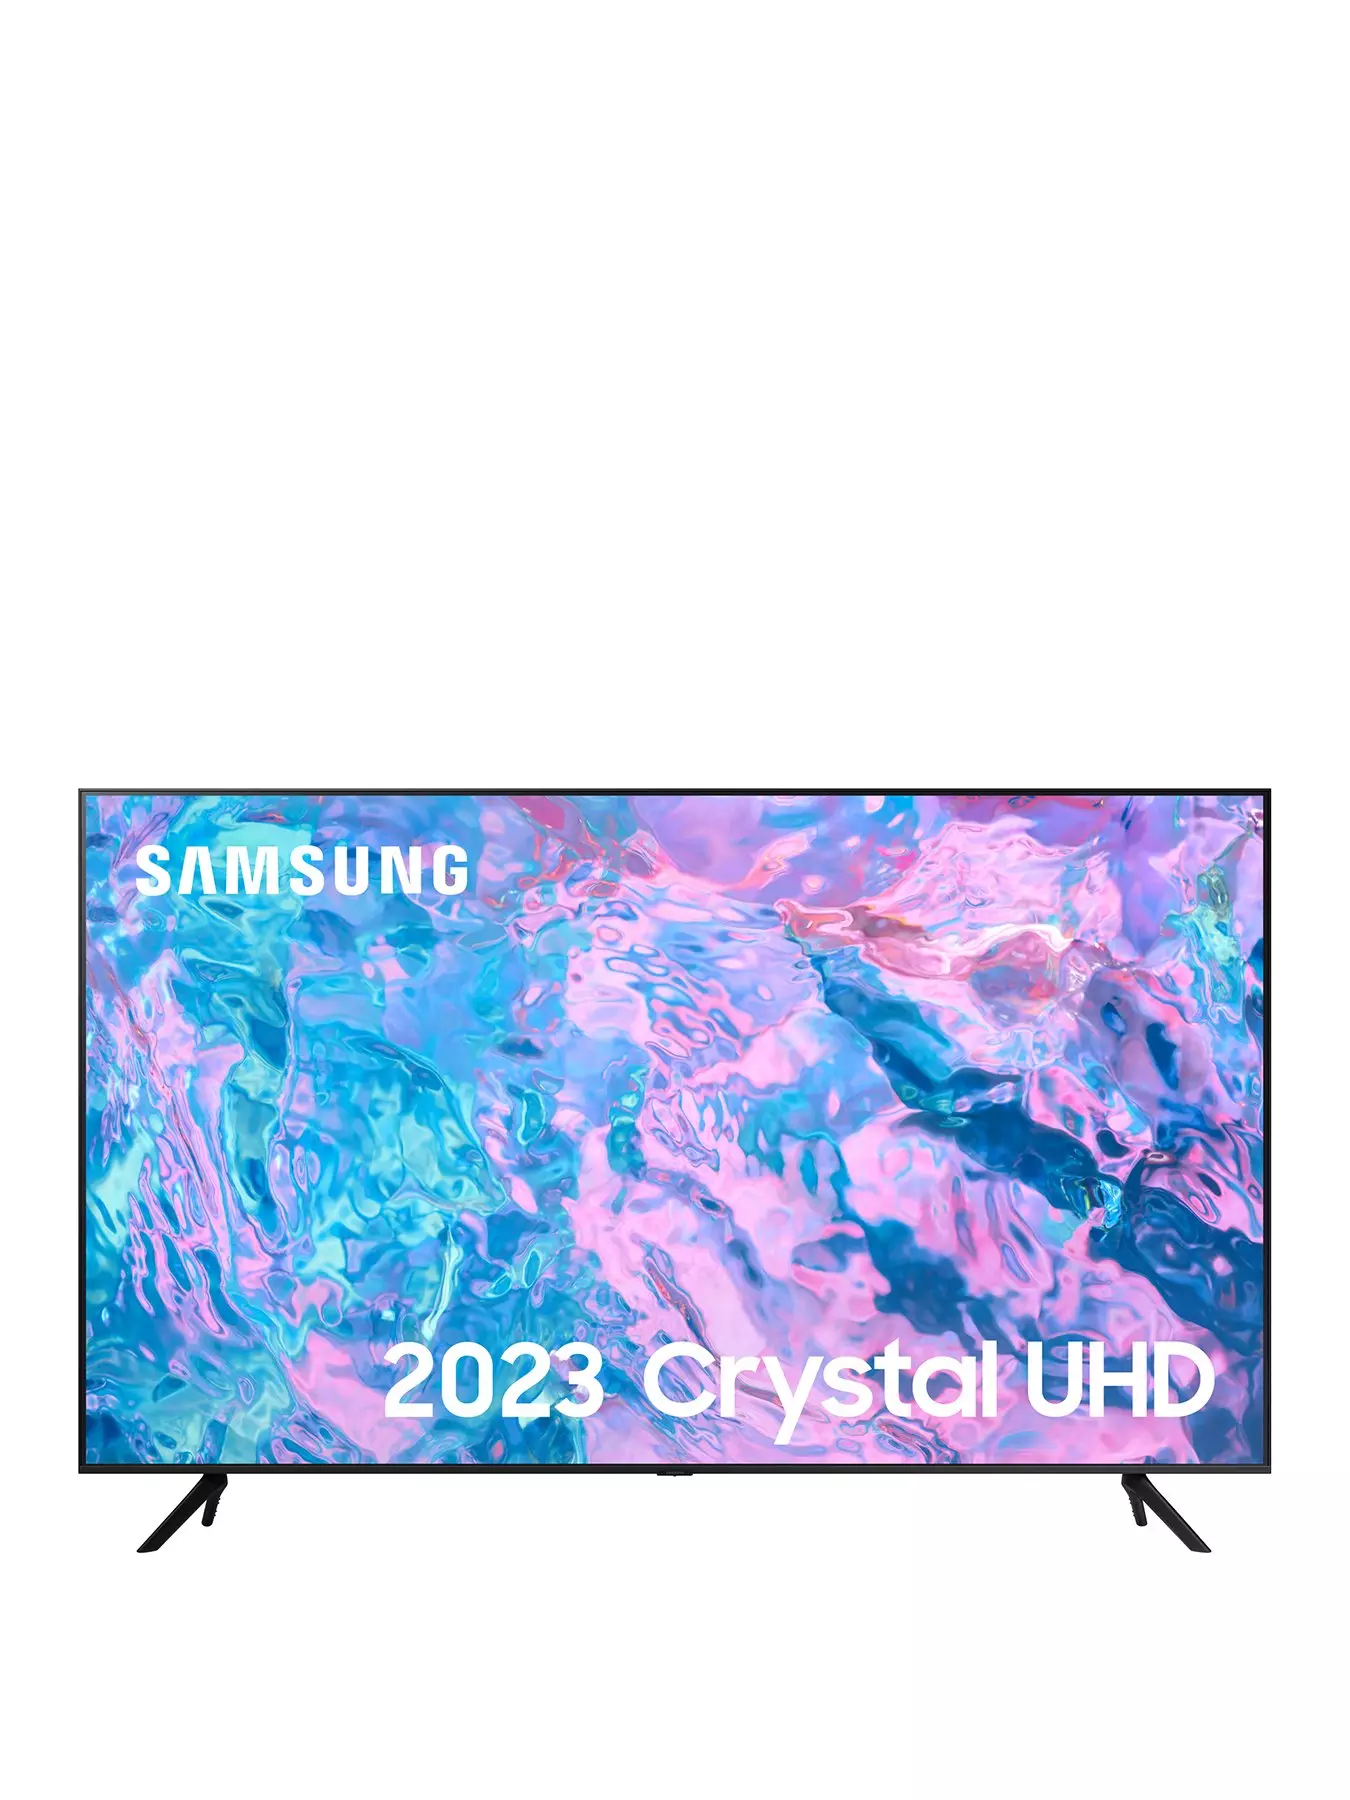 51 - 55 Inch TVs, 53 & 54 Inch Televisions